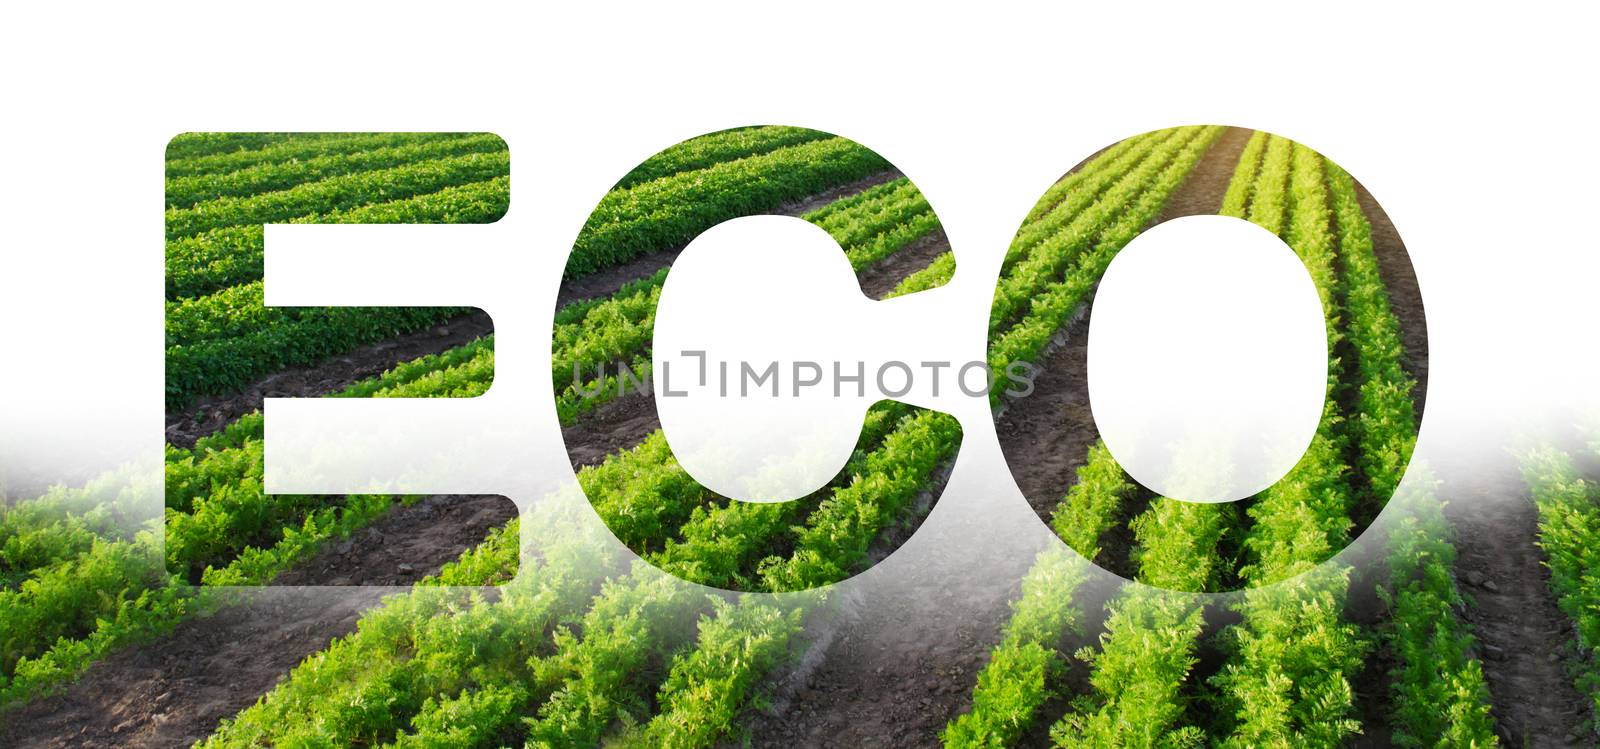 Eco inscription on the background of Carrot plantation field. Environmentally friendly harvest, quality control and use of safe pesticides. Vegetable rows. Organic vegetables. Landscape agriculture.